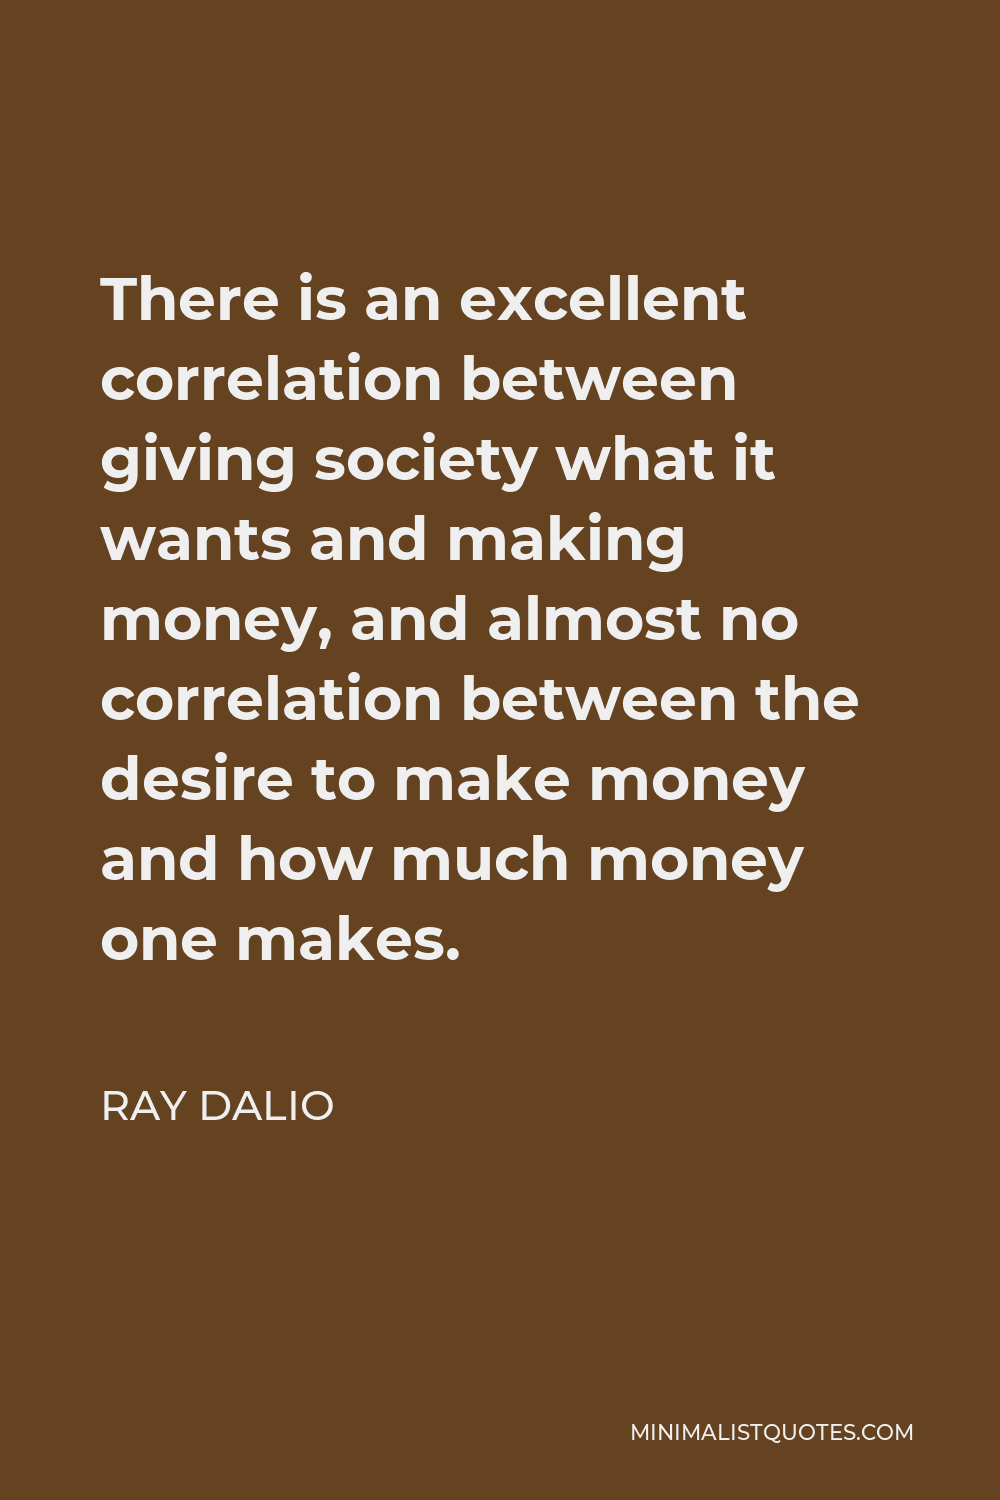 Ray Dalio Quote - There is an excellent correlation between giving society what it wants and making money, and almost no correlation between the desire to make money and how much money one makes.